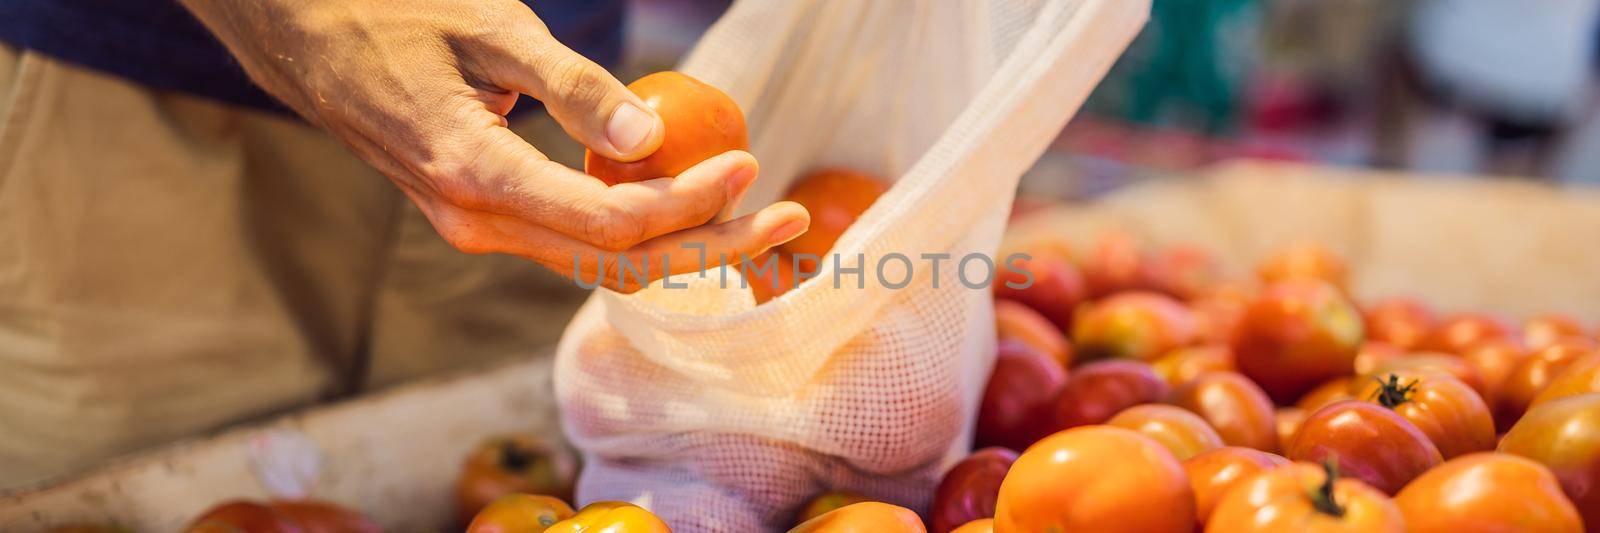 Man chooses tomatoes in a supermarket without using a plastic bag. Reusable bag for buying vegetables. Zero waste concept. BANNER, LONG FORMAT